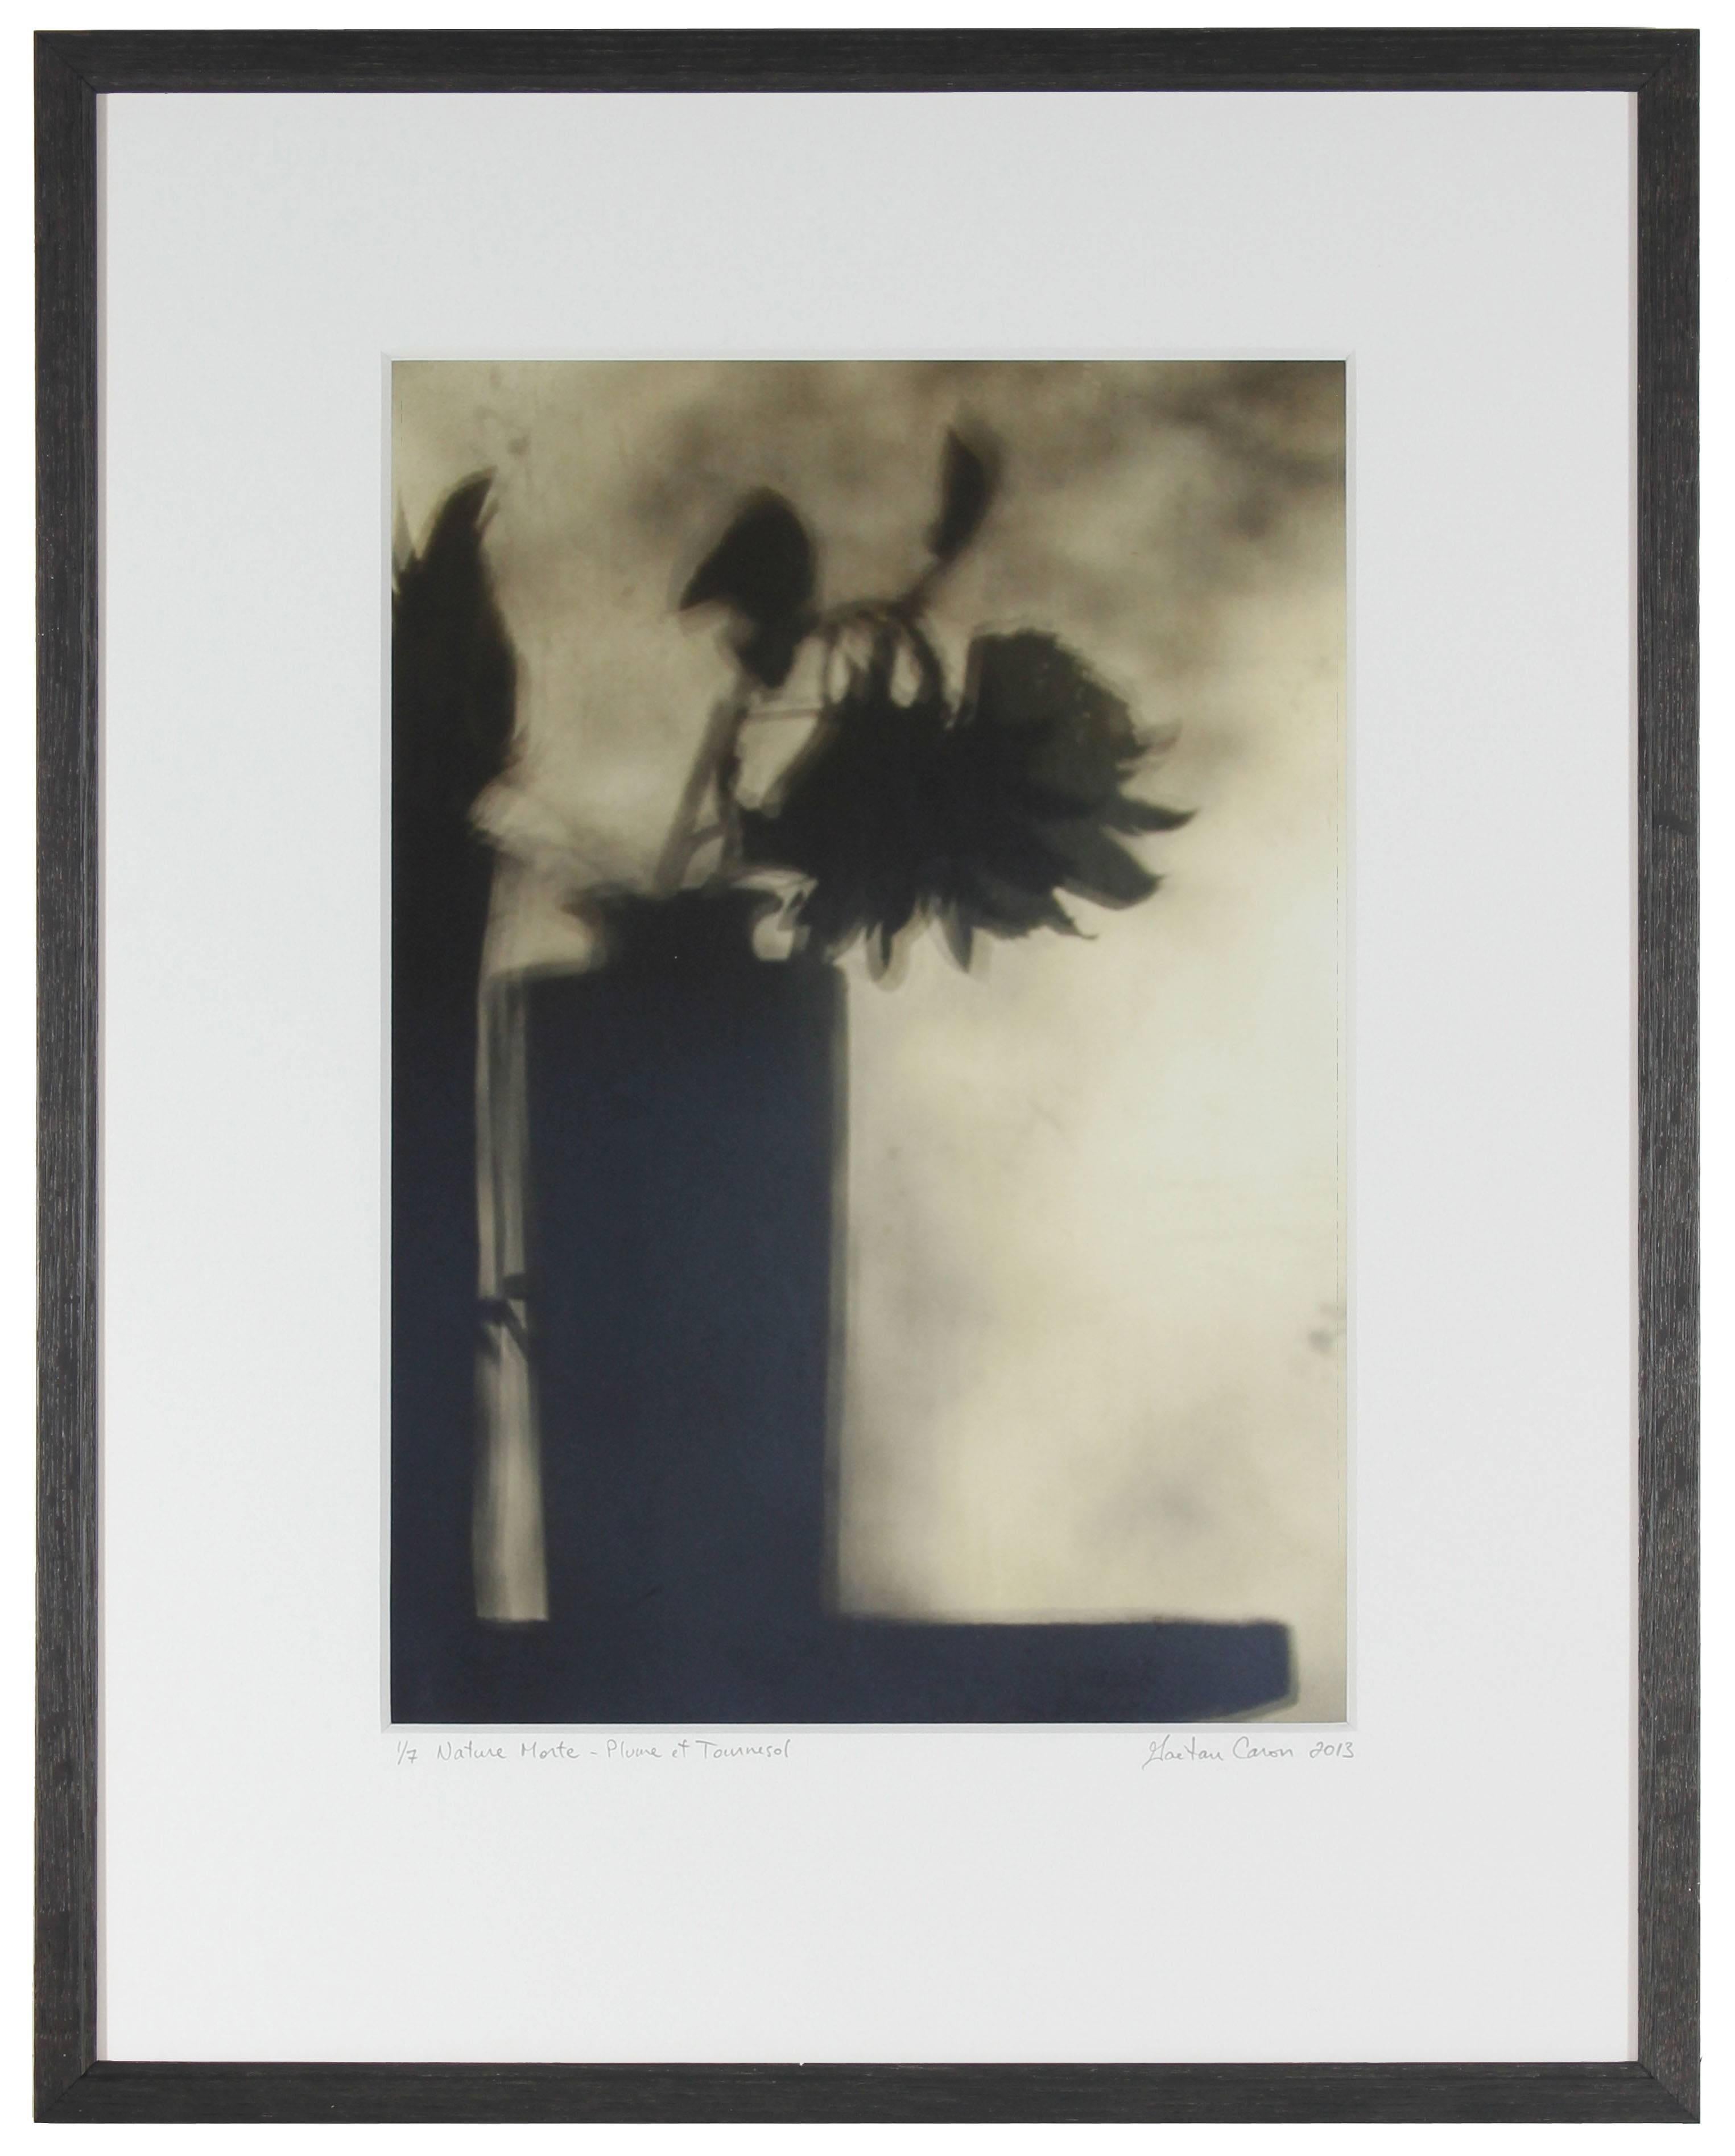 Please allow at least 14 days for printing and framing before a piece is shipped.

Entitled "Still Life with Feather & Sunflower" (Nature morte avec plum et tournes), this 2013 archival photograph on Hahnemuhle Fine Art Pearl paper is